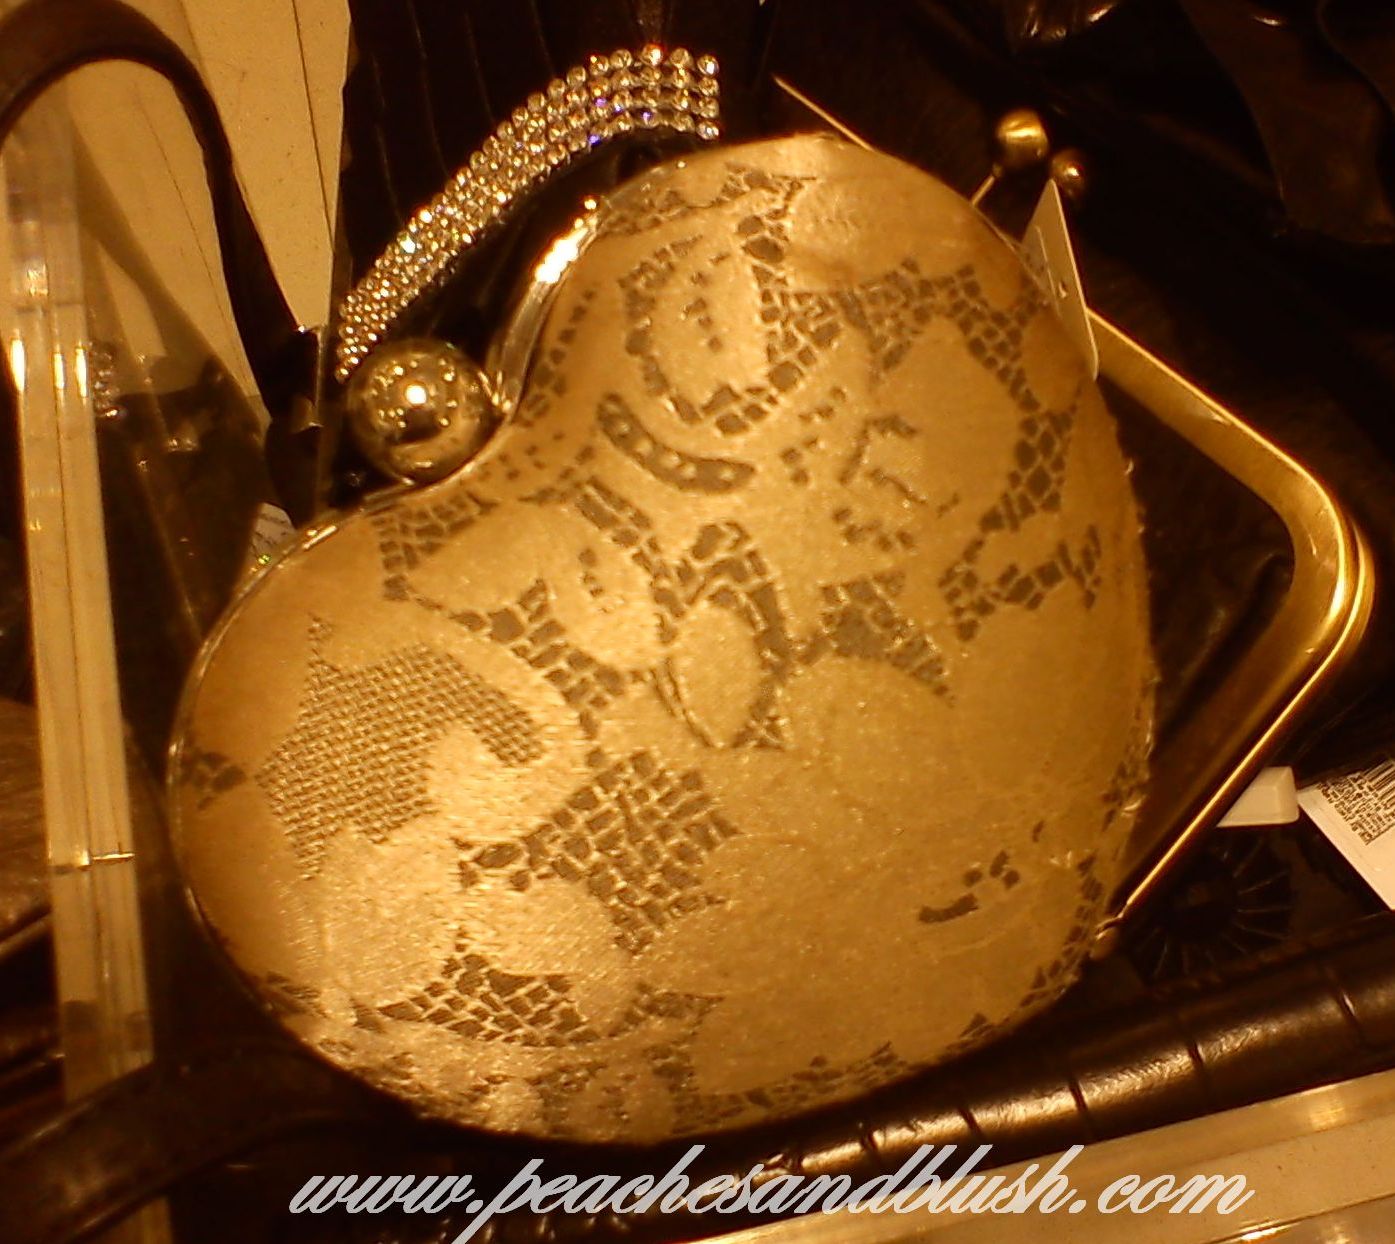 Heart Shaped Clutch with thin silver long chain- Rs 450 (I think)